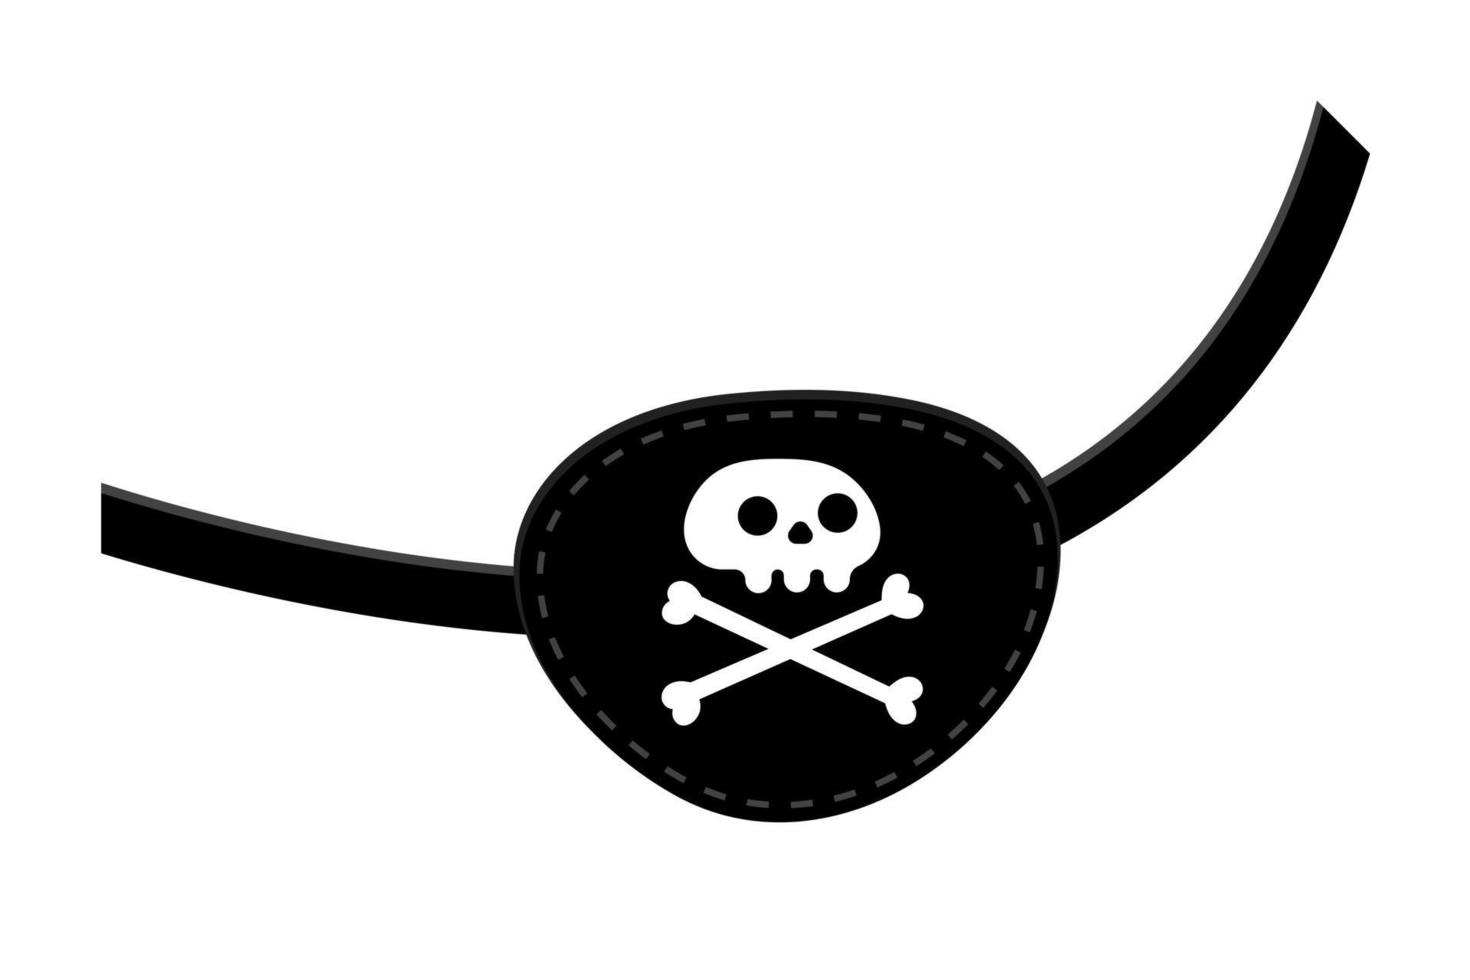 https://static.vecteezy.com/system/resources/previews/006/297/904/non_2x/pirate-eye-patch-icon-sign-flat-style-design-illustration-isolated-on-white-background-vector.jpg